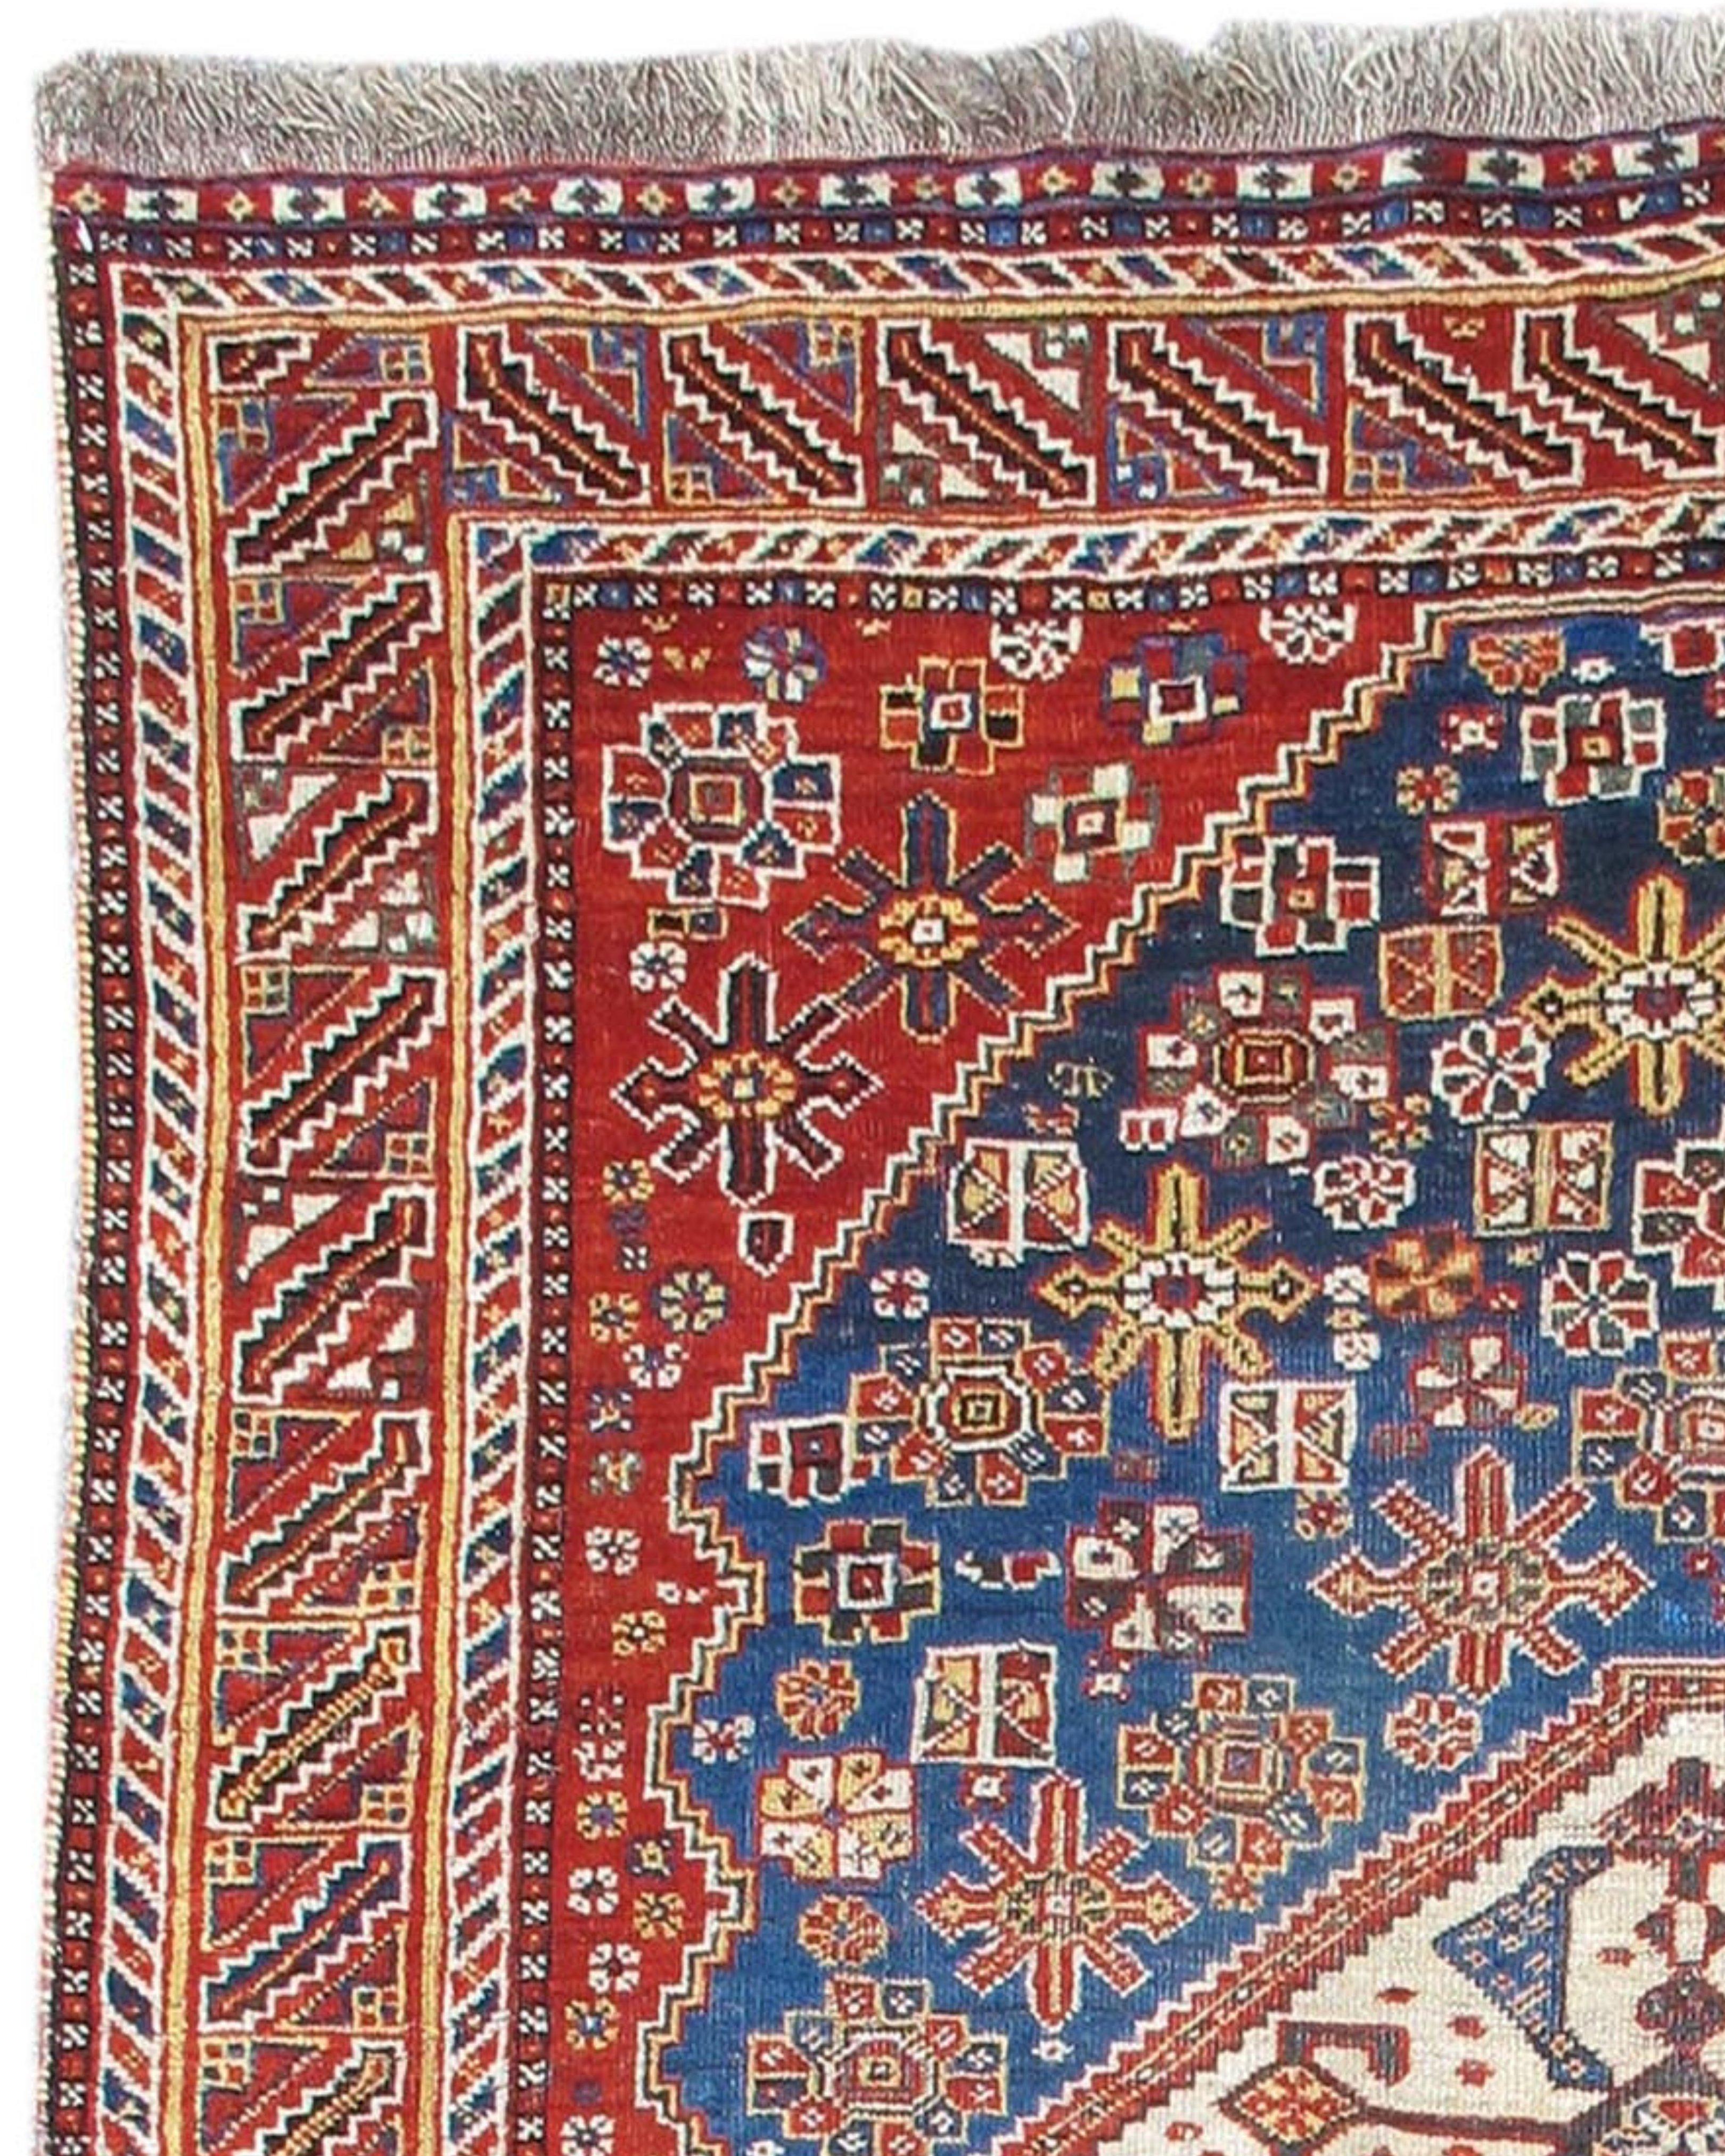 Antique Southwest Persian Qashqai Rug, c. 1900 In Excellent Condition For Sale In San Francisco, CA